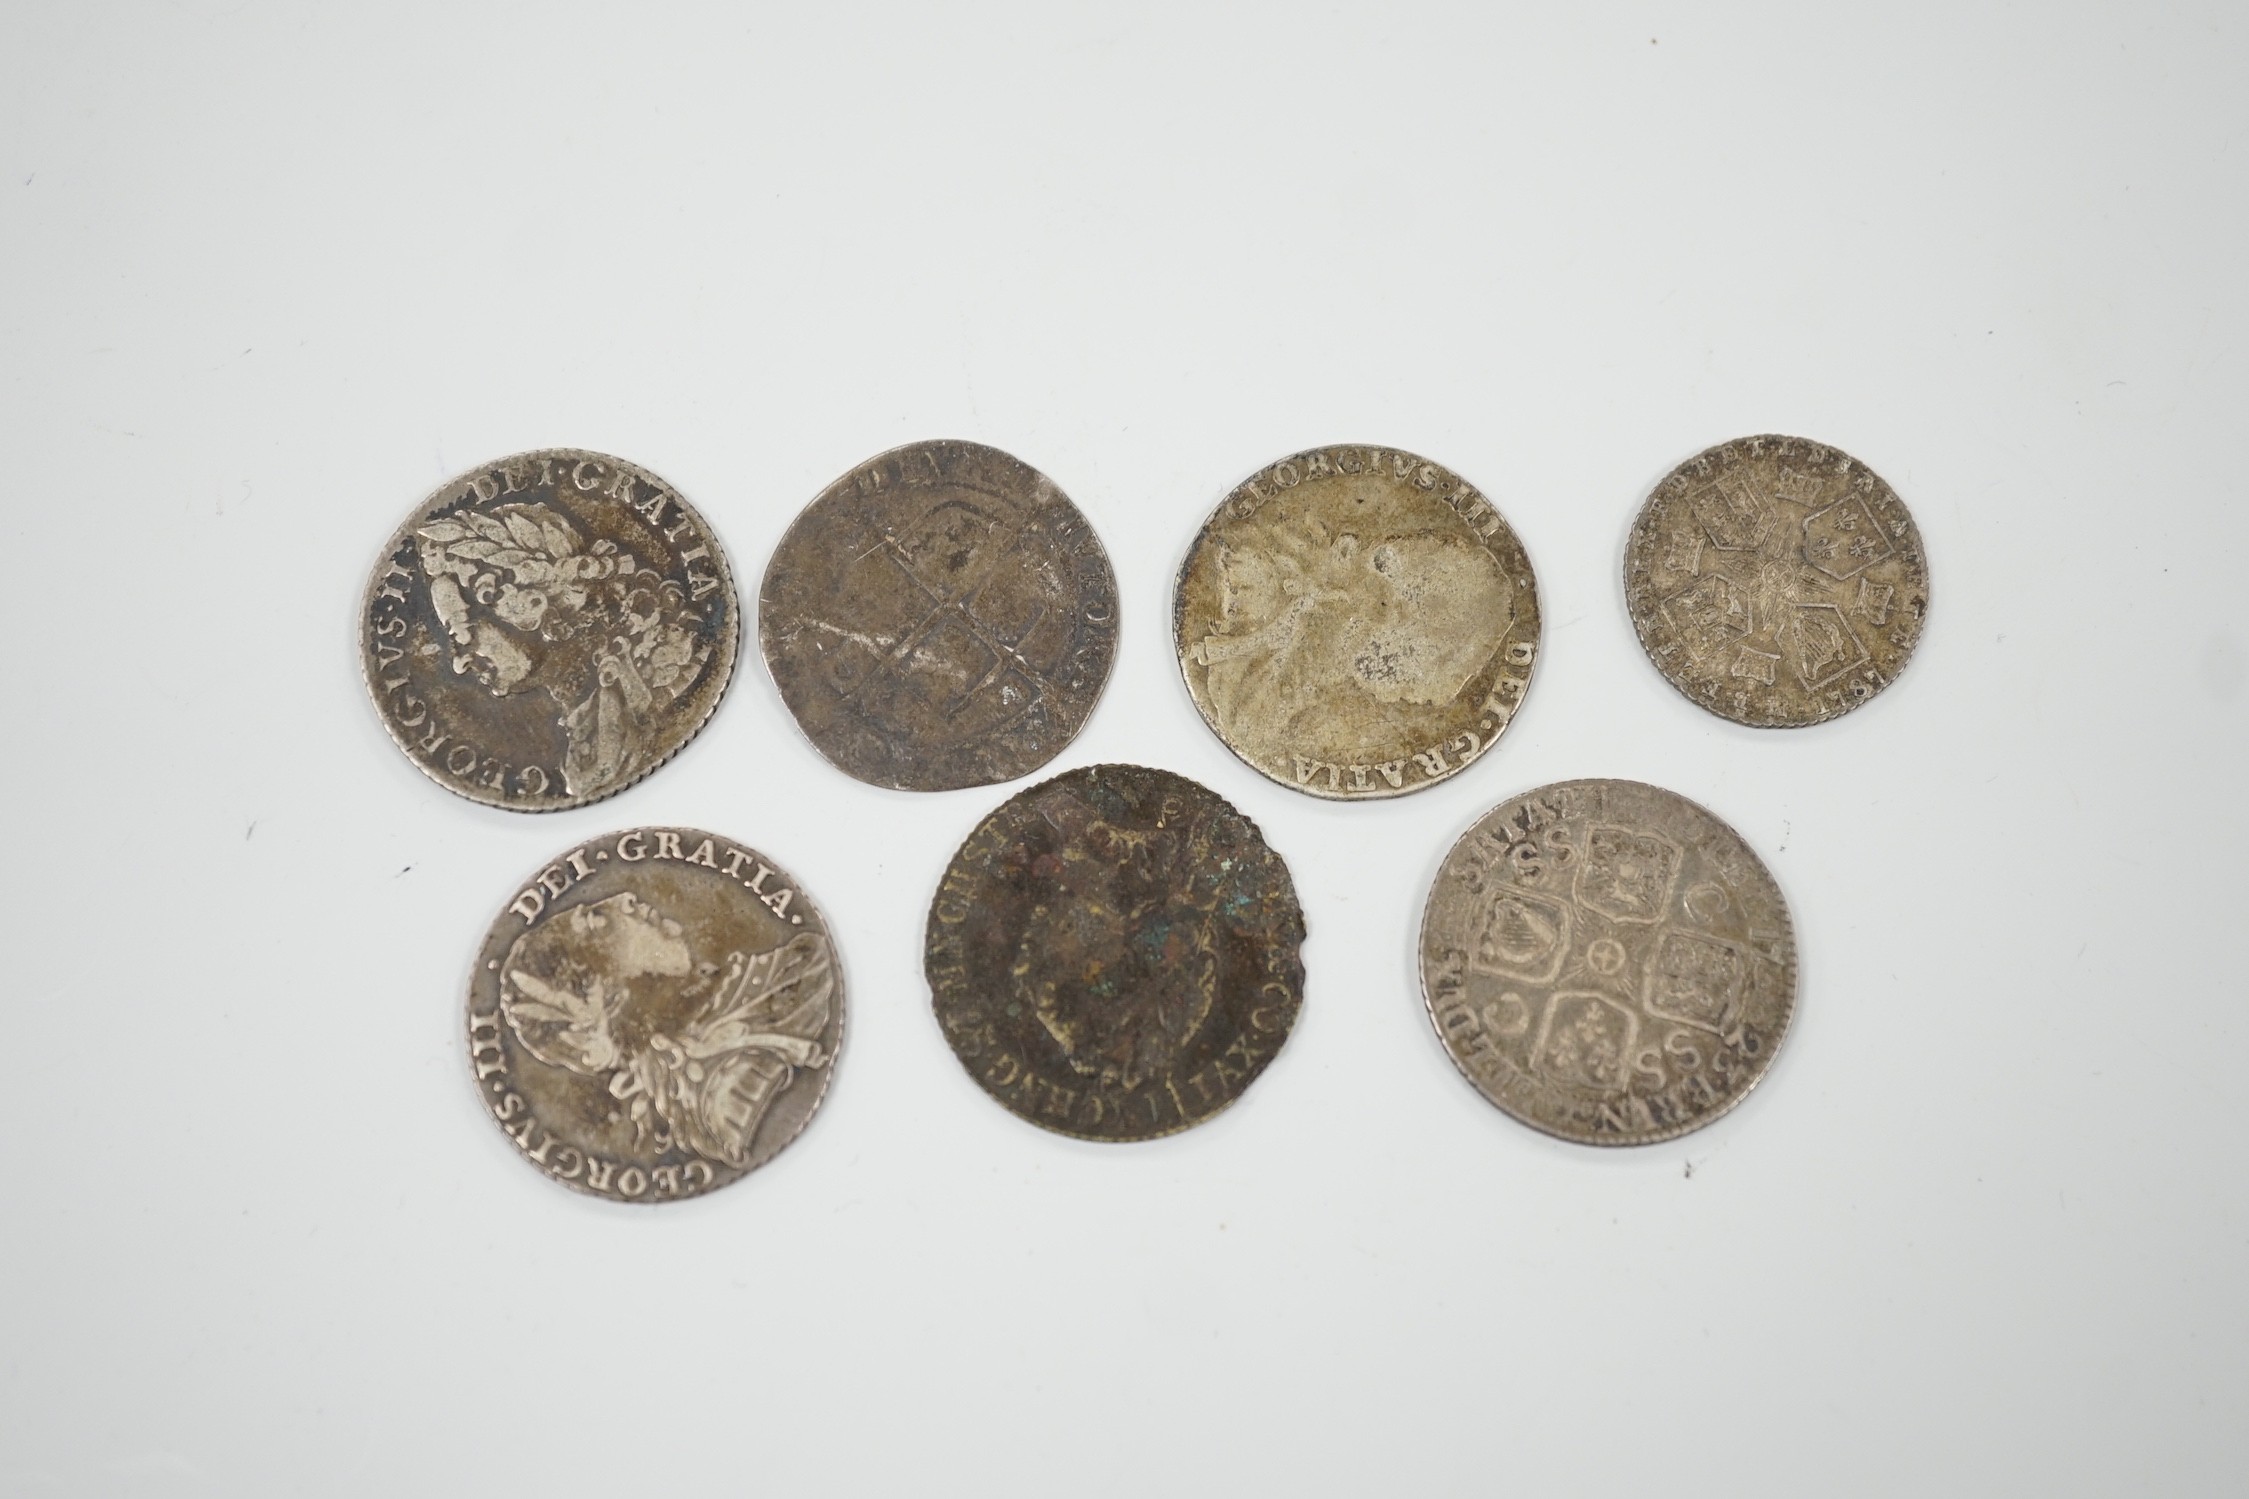 Four 18th century shillings, a sixpence an Elizabeth I coin and a token